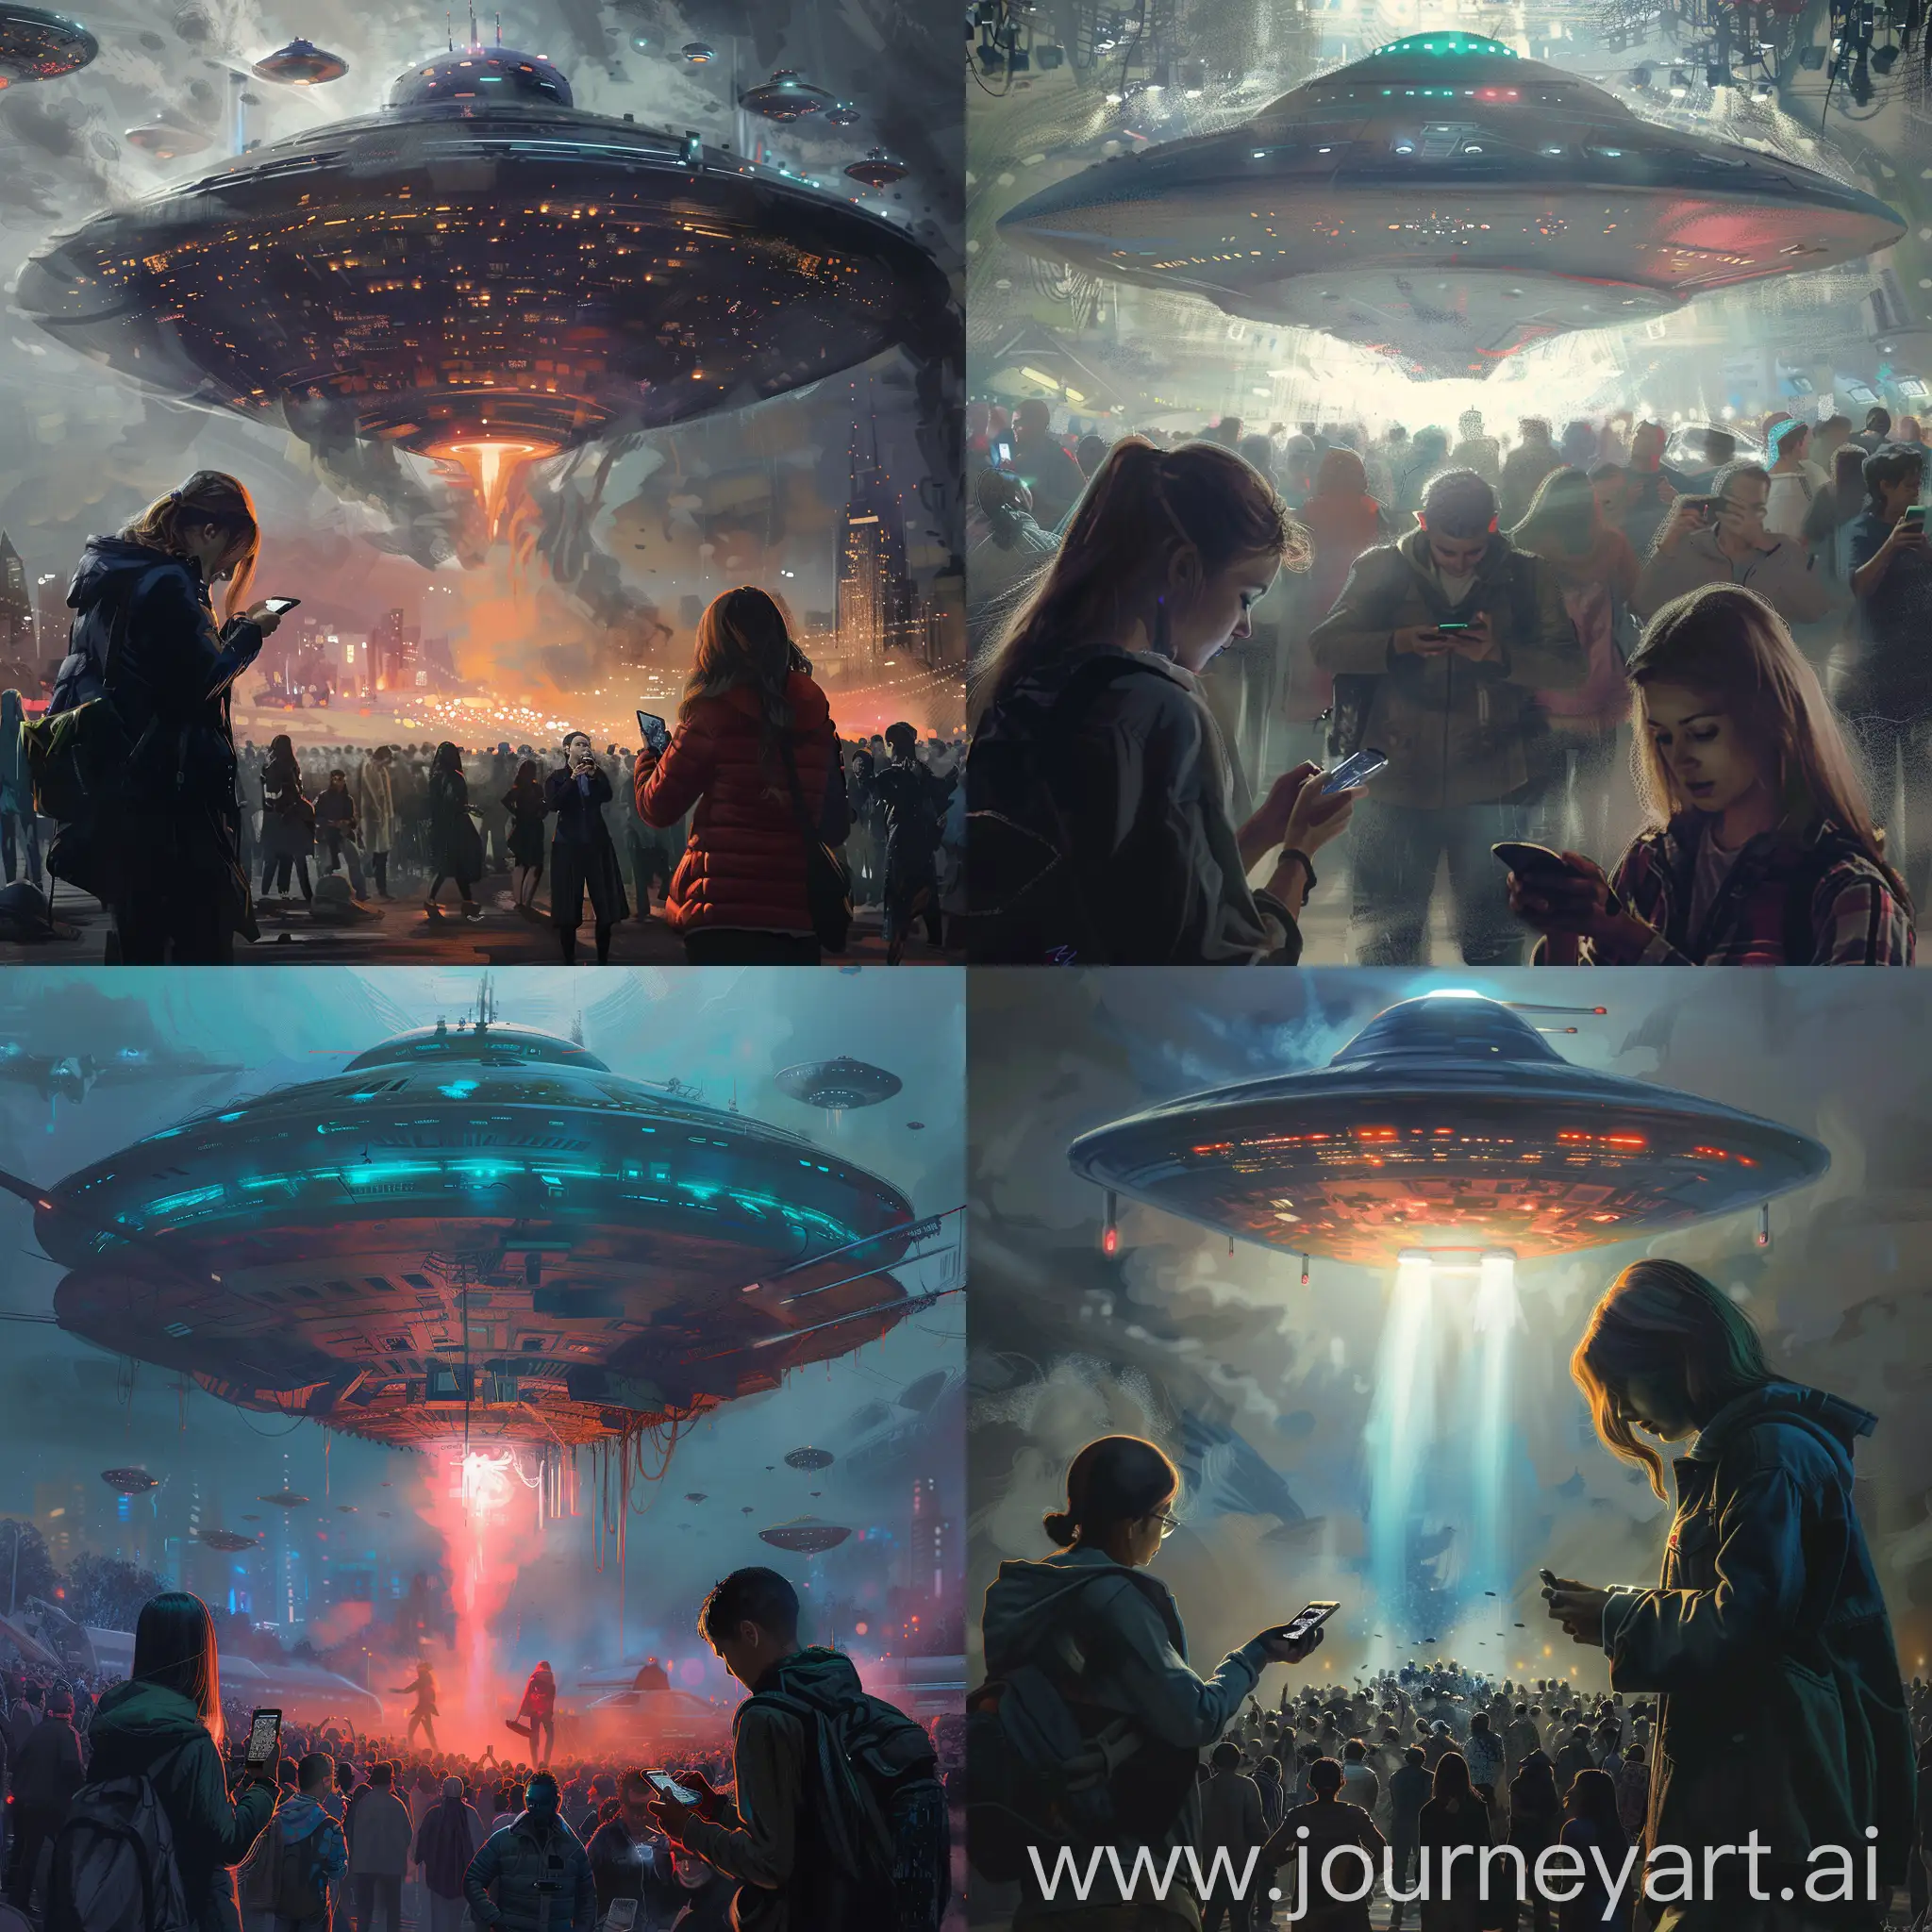 Giant UFO over crowd of people, 2 people in foreground look down at their phones.
Artistic, vibrant, hyper-realistic, artstation, 